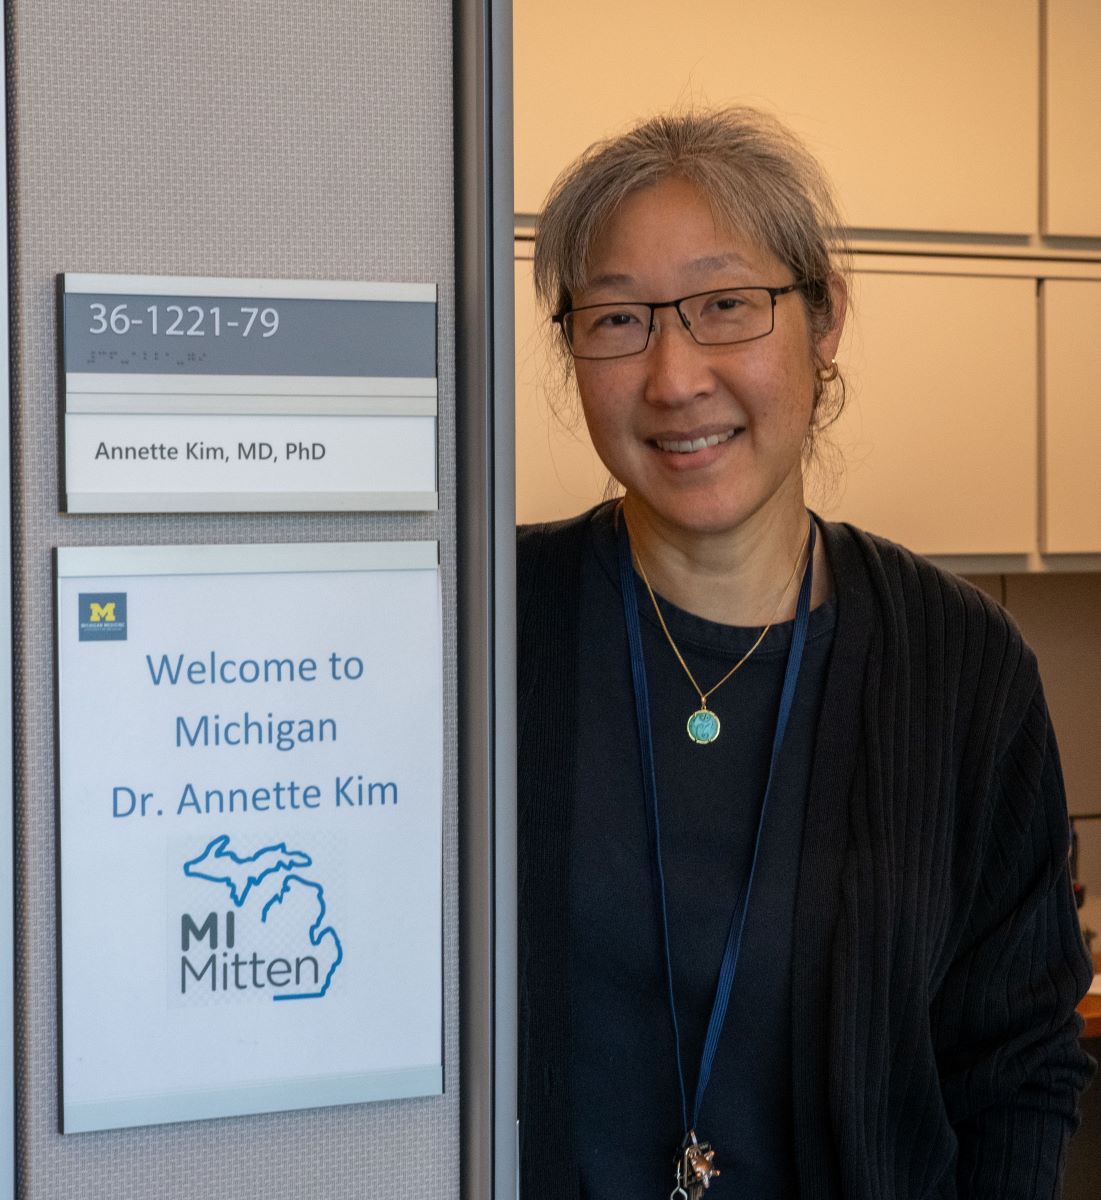 Dr. Kim is welcomed to Michigan